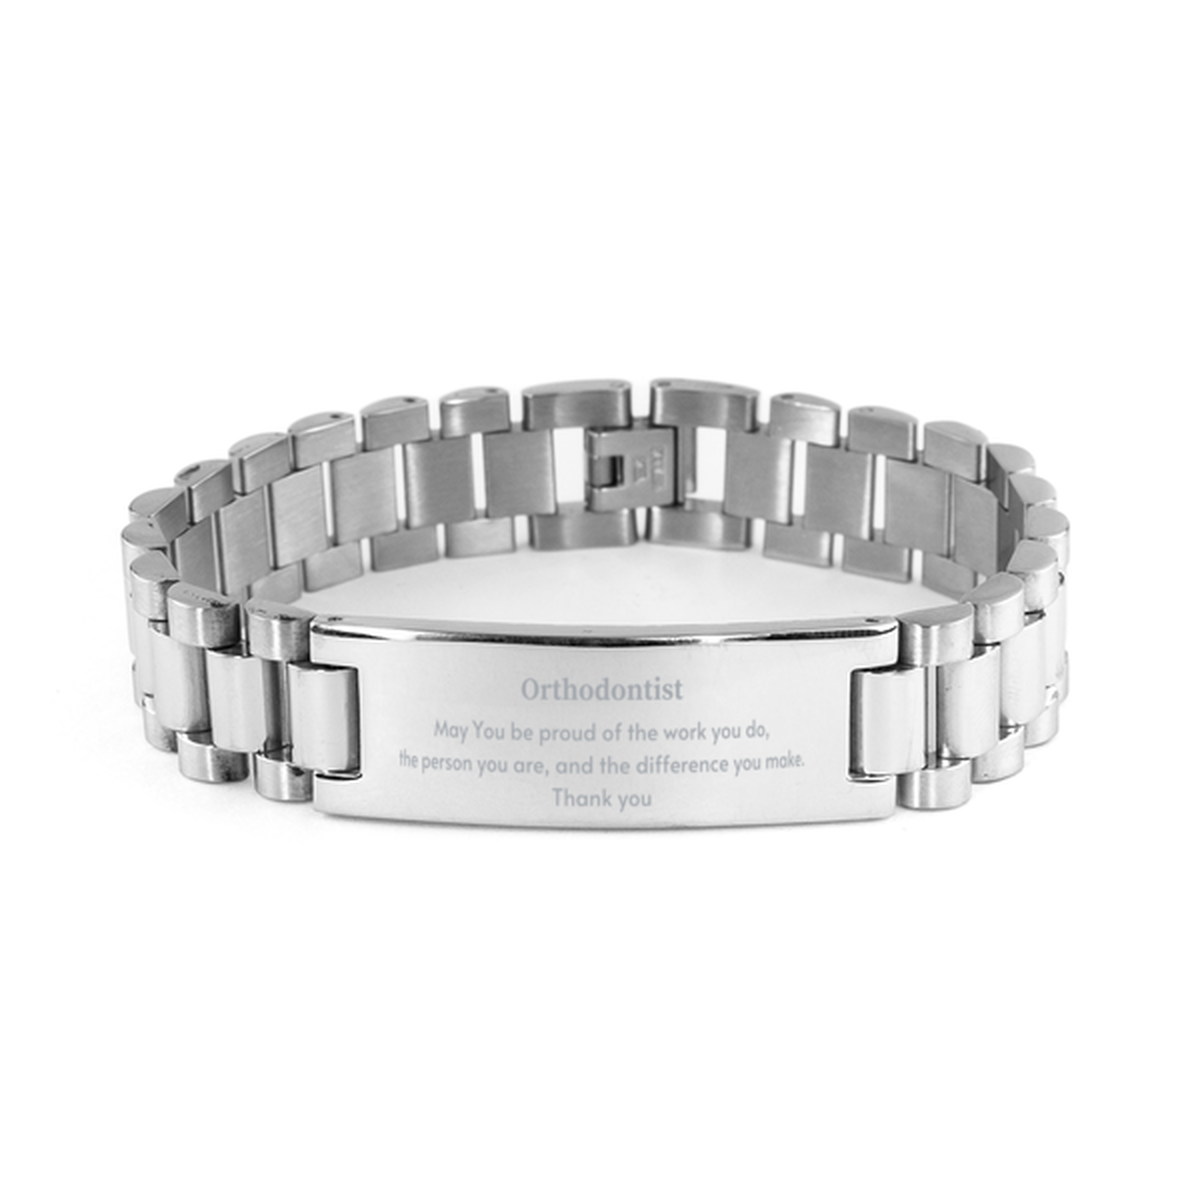 Heartwarming Ladder Stainless Steel Bracelet Retirement Coworkers Gifts for Orthodontist, Orthodontist May You be proud of the work you do, the person you are Gifts for Boss Men Women Friends